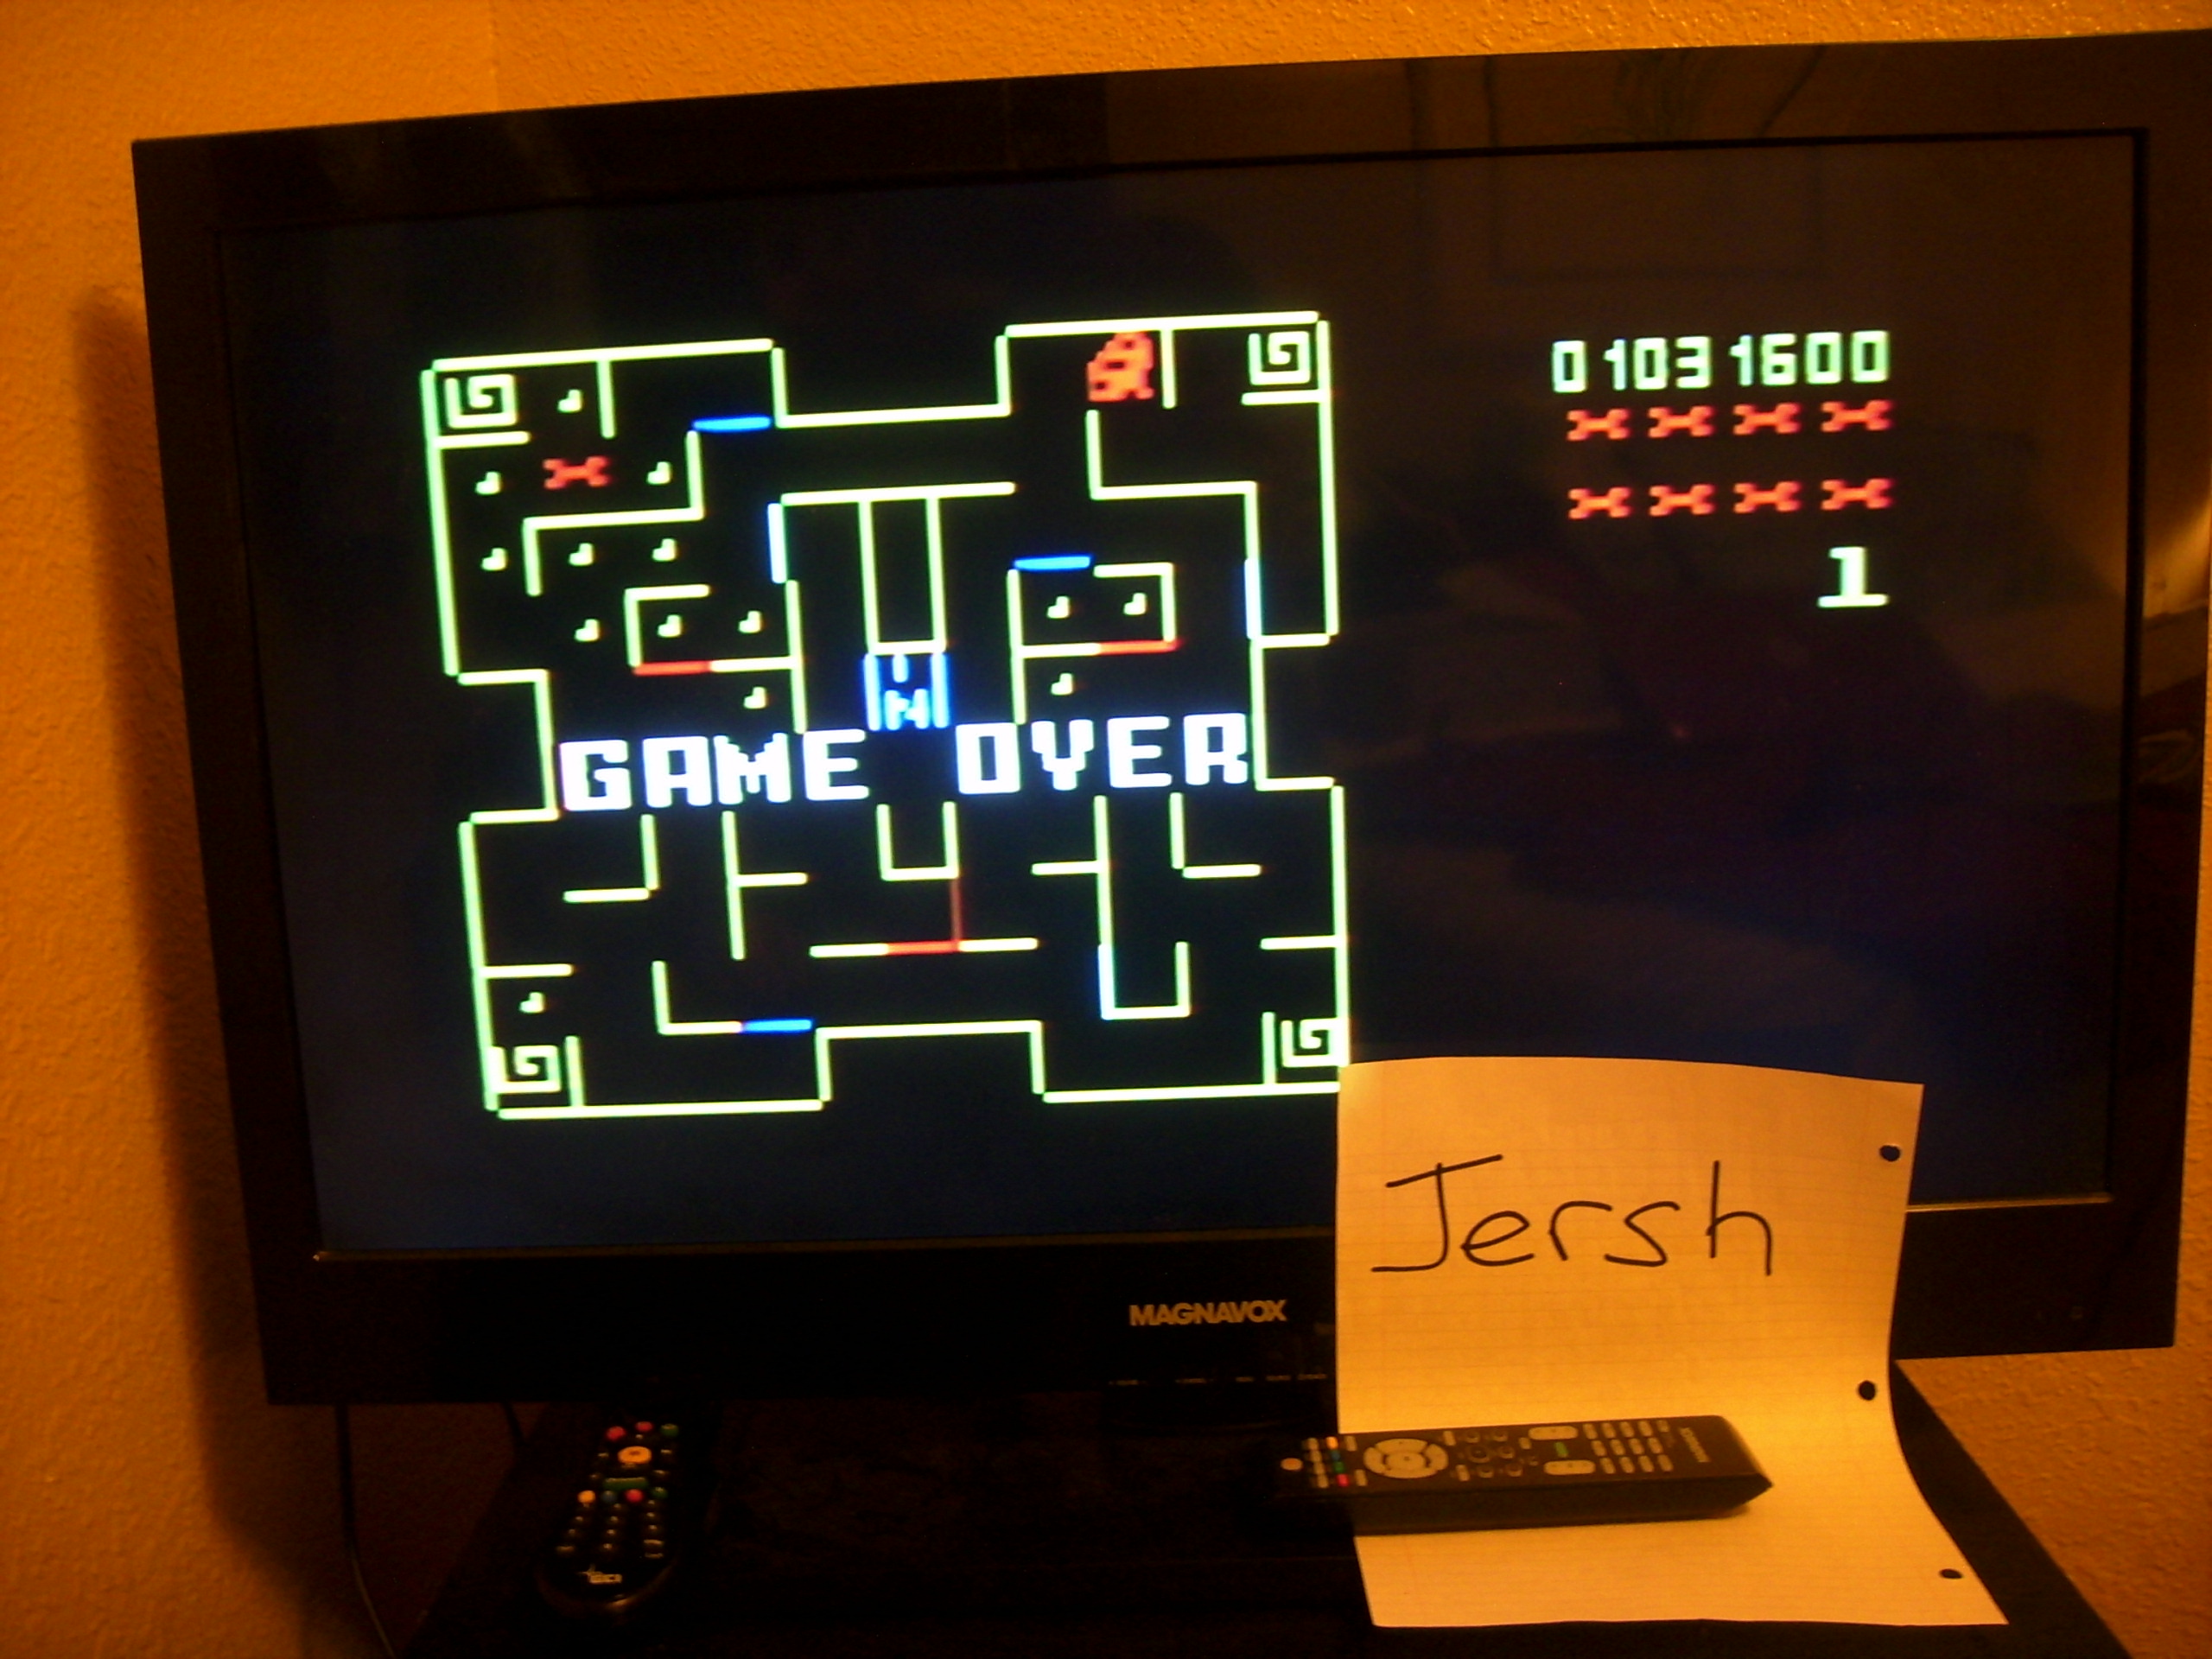 jersh: Mouse Trap: Skill 1 (Intellivision) 1,031,600 points on 2015-06-14 03:51:45